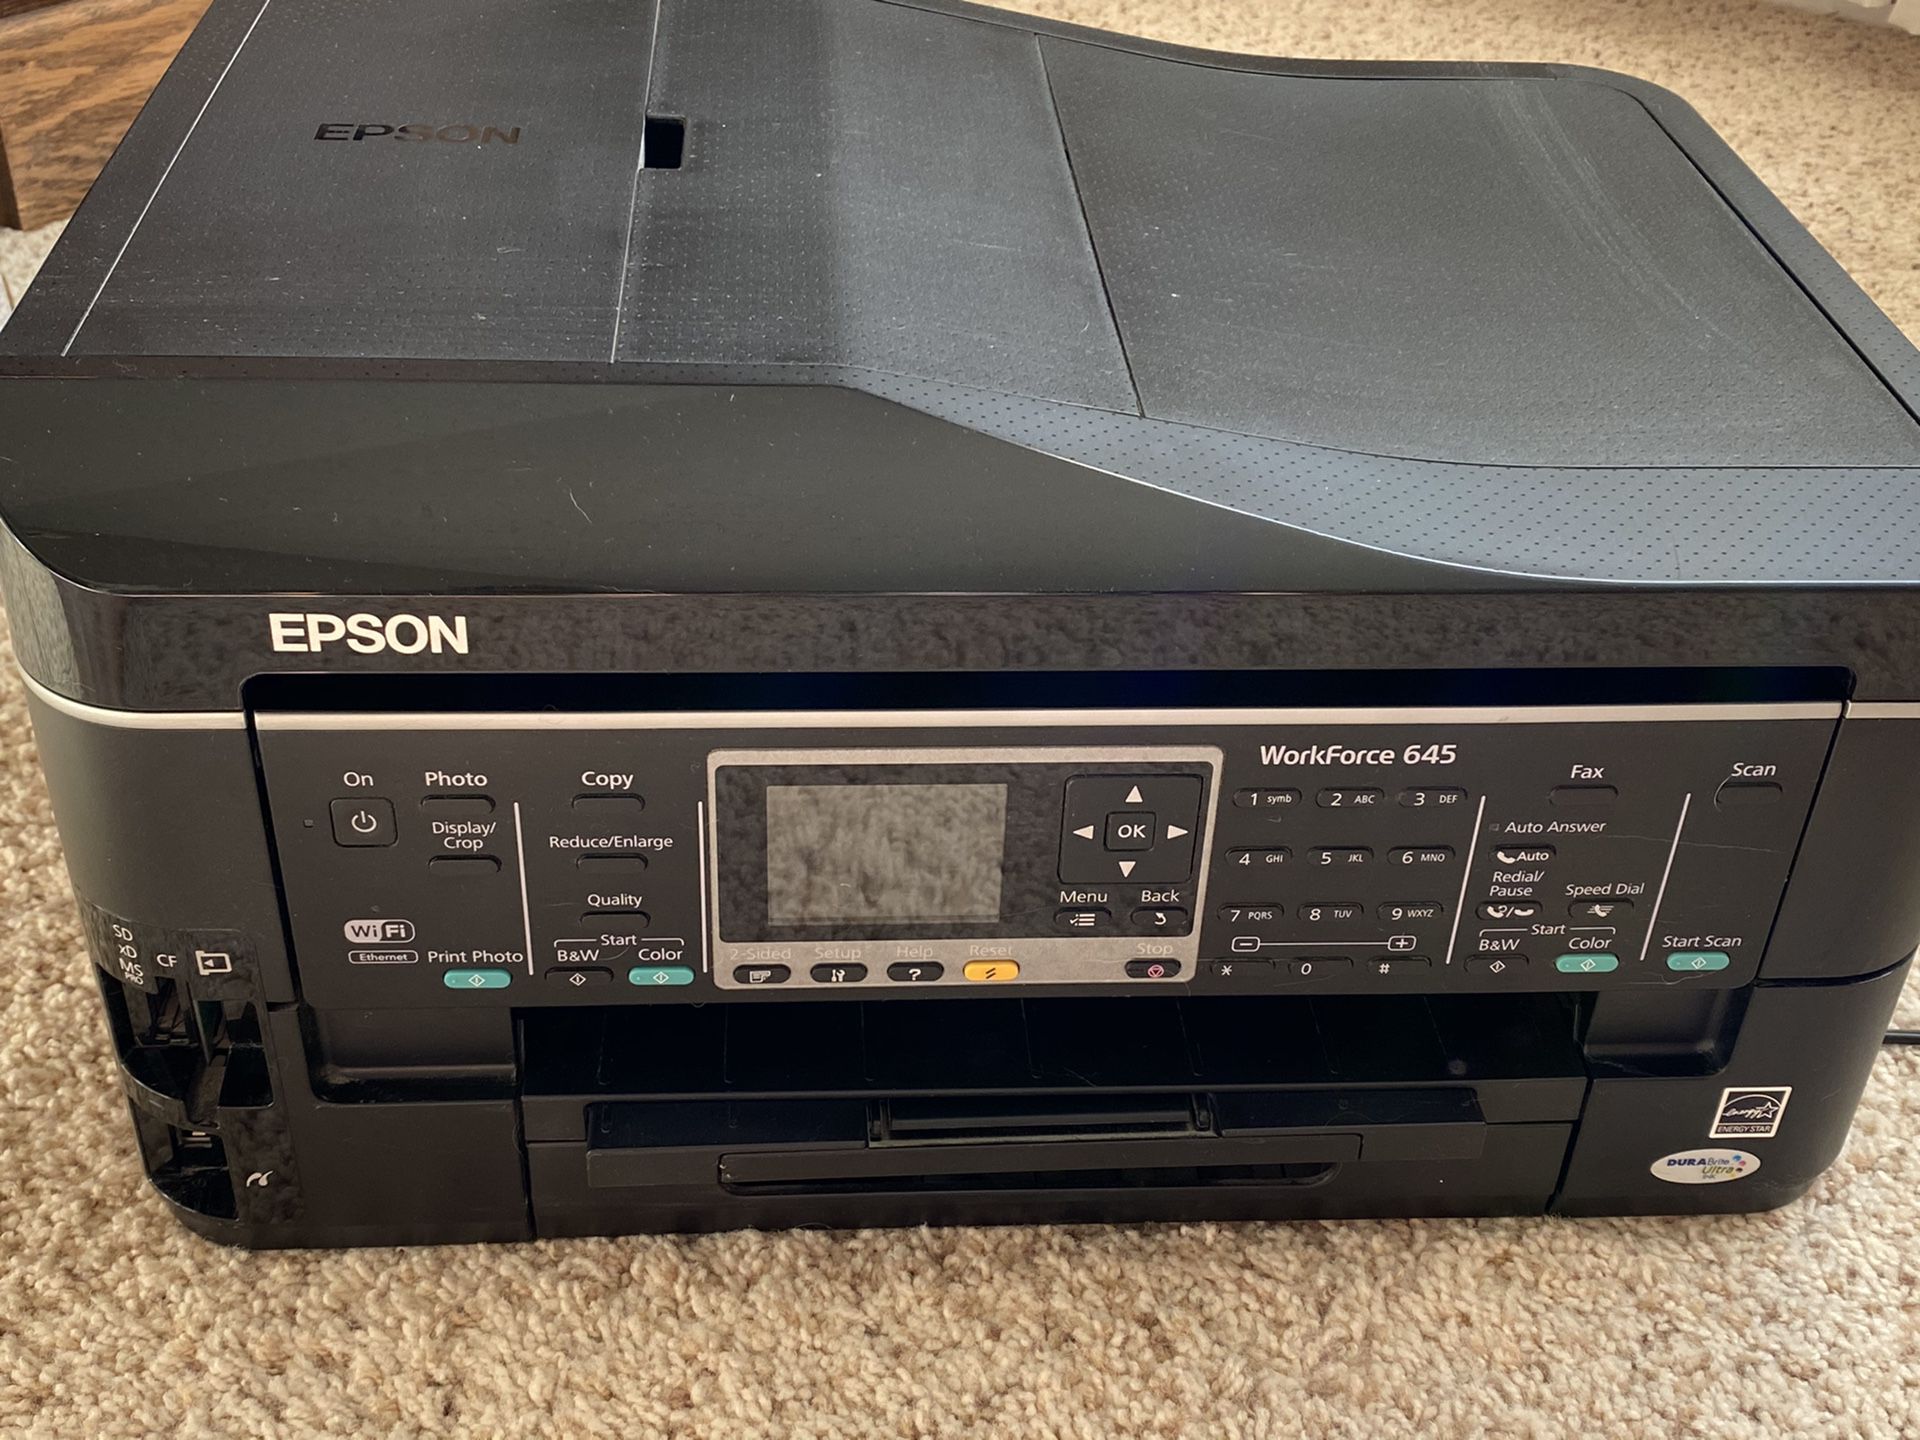 Epson workforce 645 printer All-in-One